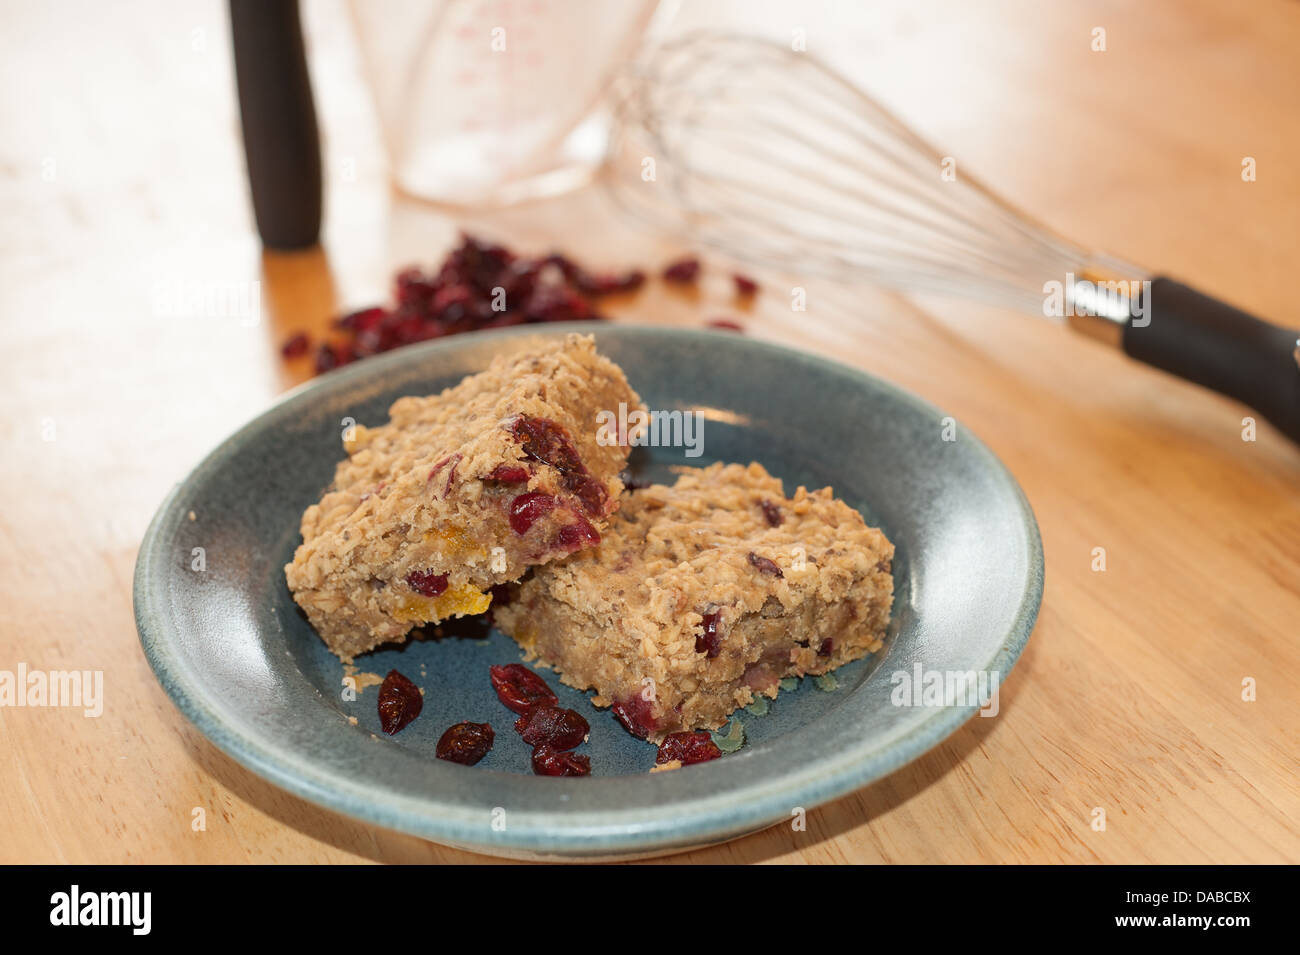 Color images of homemade oat and cranberry energy bars on a pottery plate showing some of the ingredients and utensils on table. Stock Photo